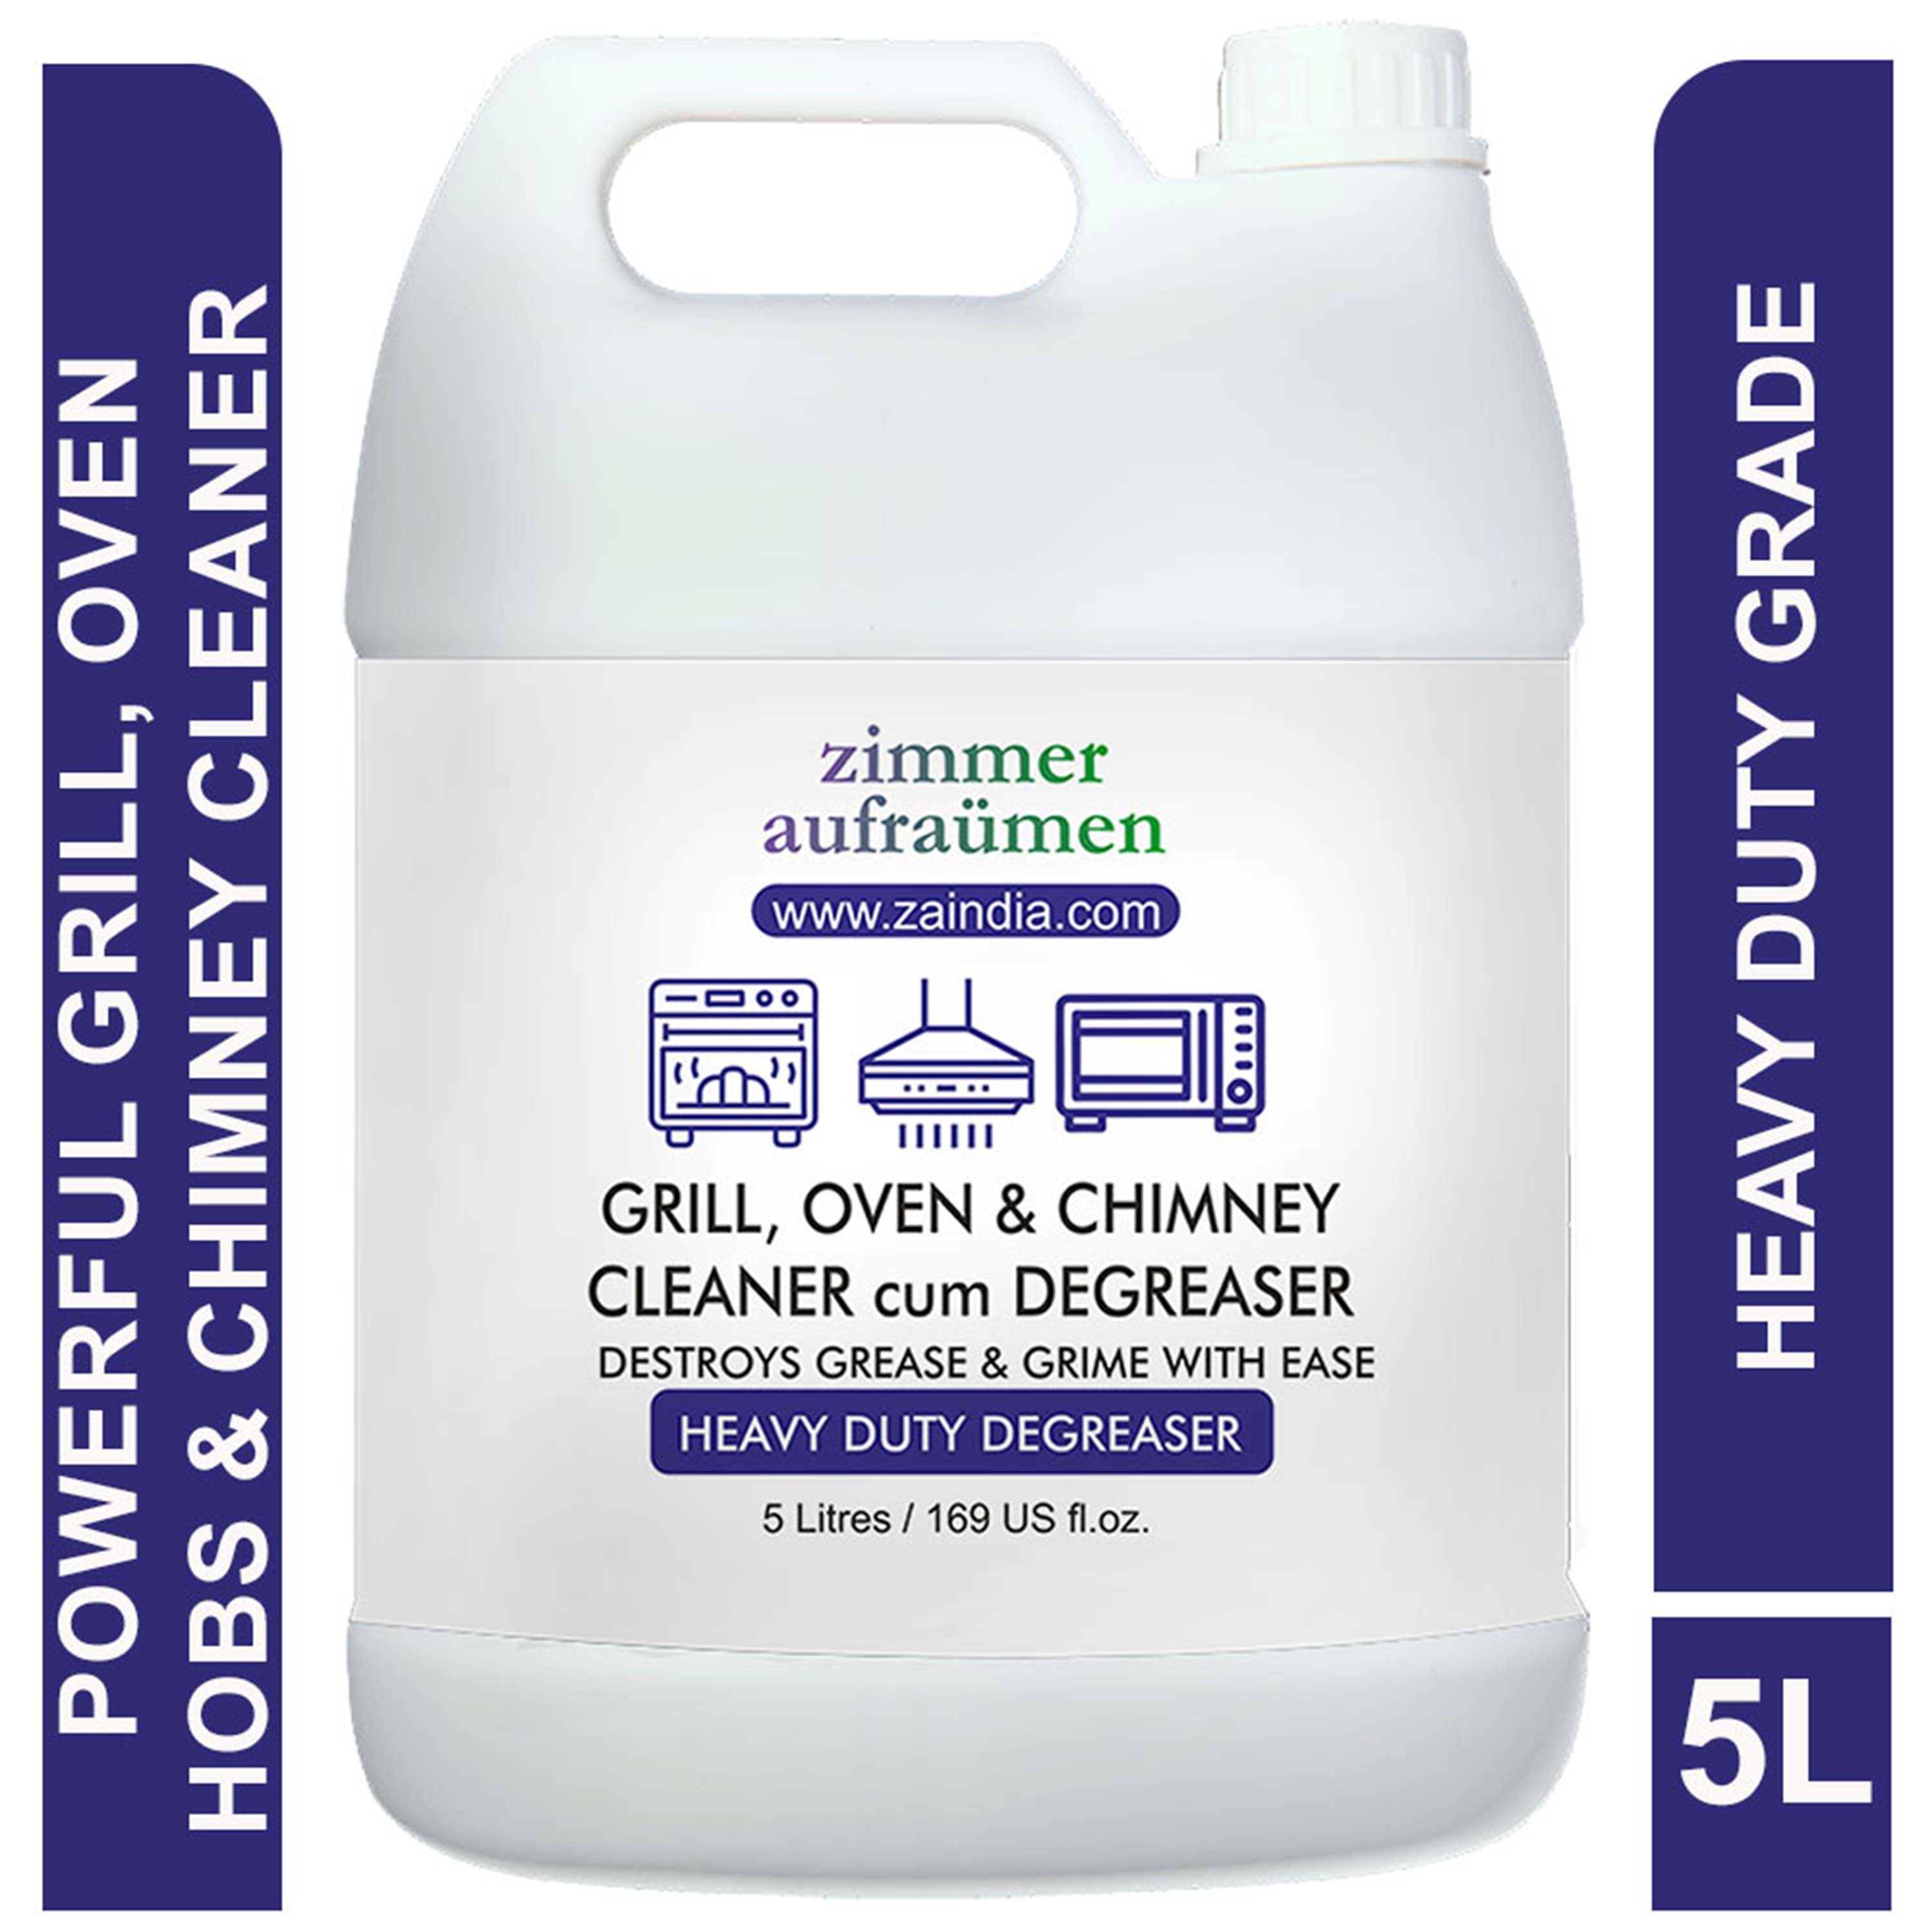 zimmer-aufraumen-chimney-and-grill-cleaner-5l-removes-greases-strain-and-oil